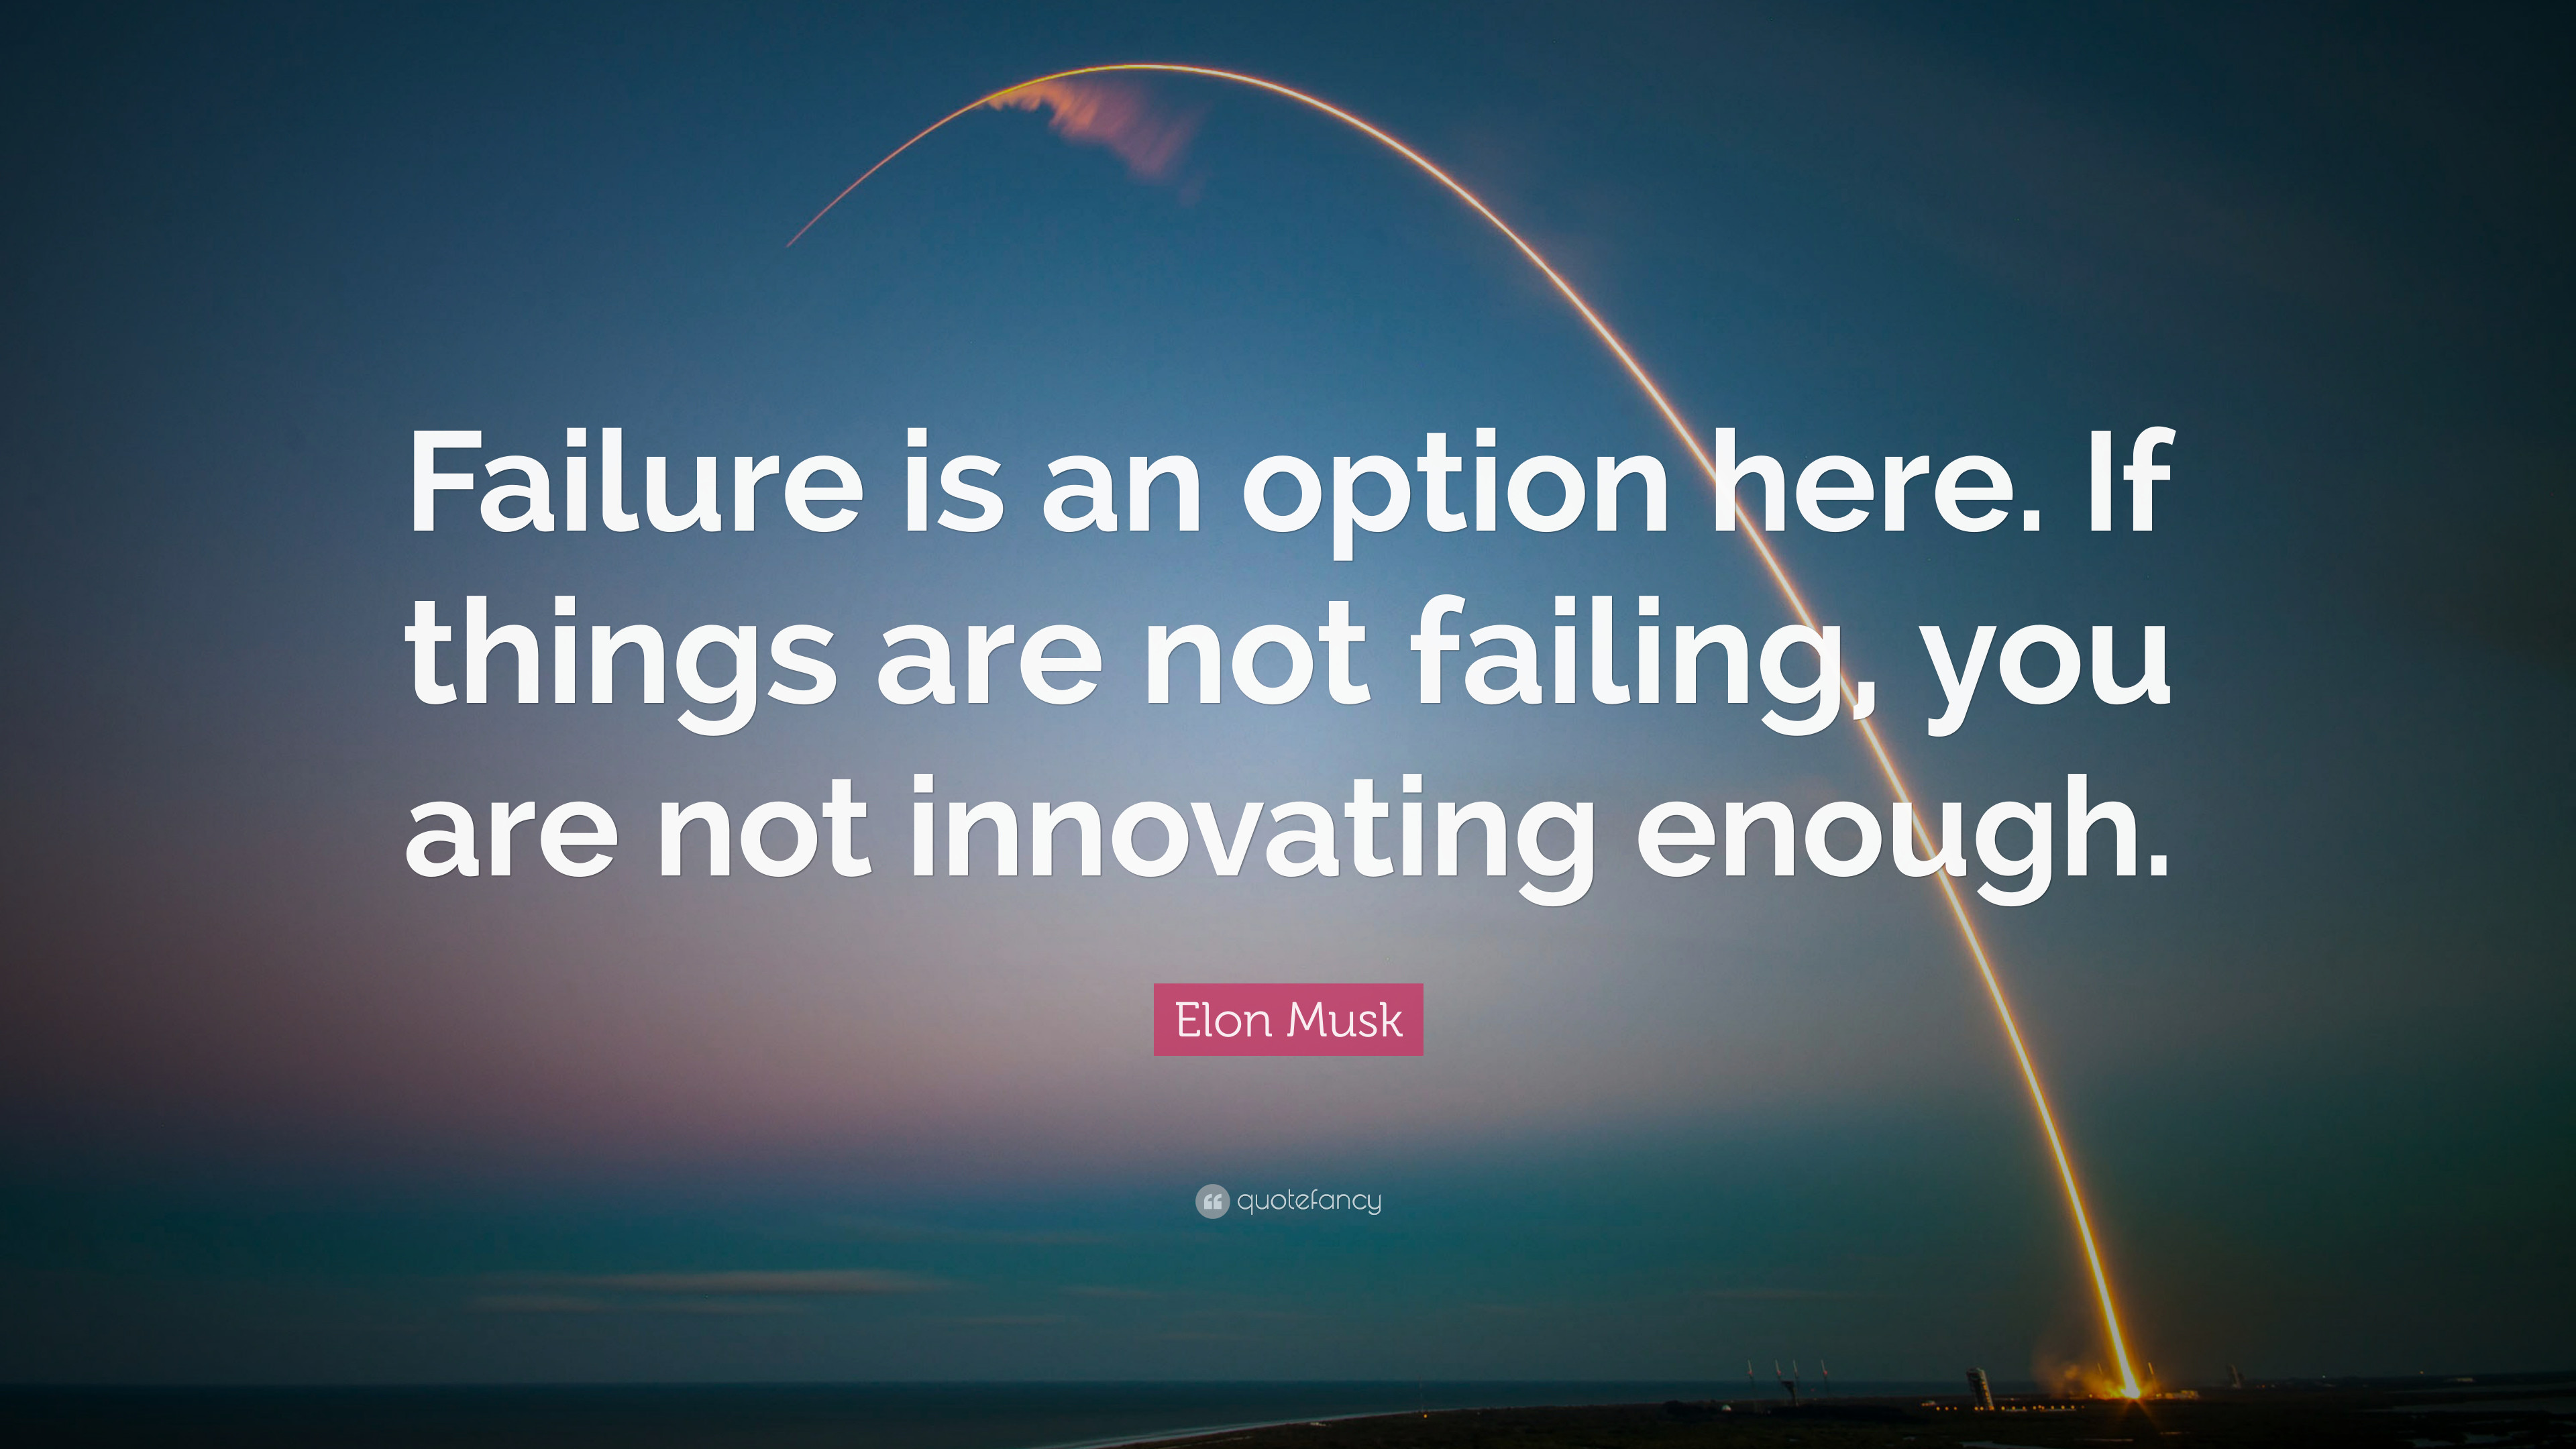 Elon Musk Quote Failure is an option here. If things are not failing